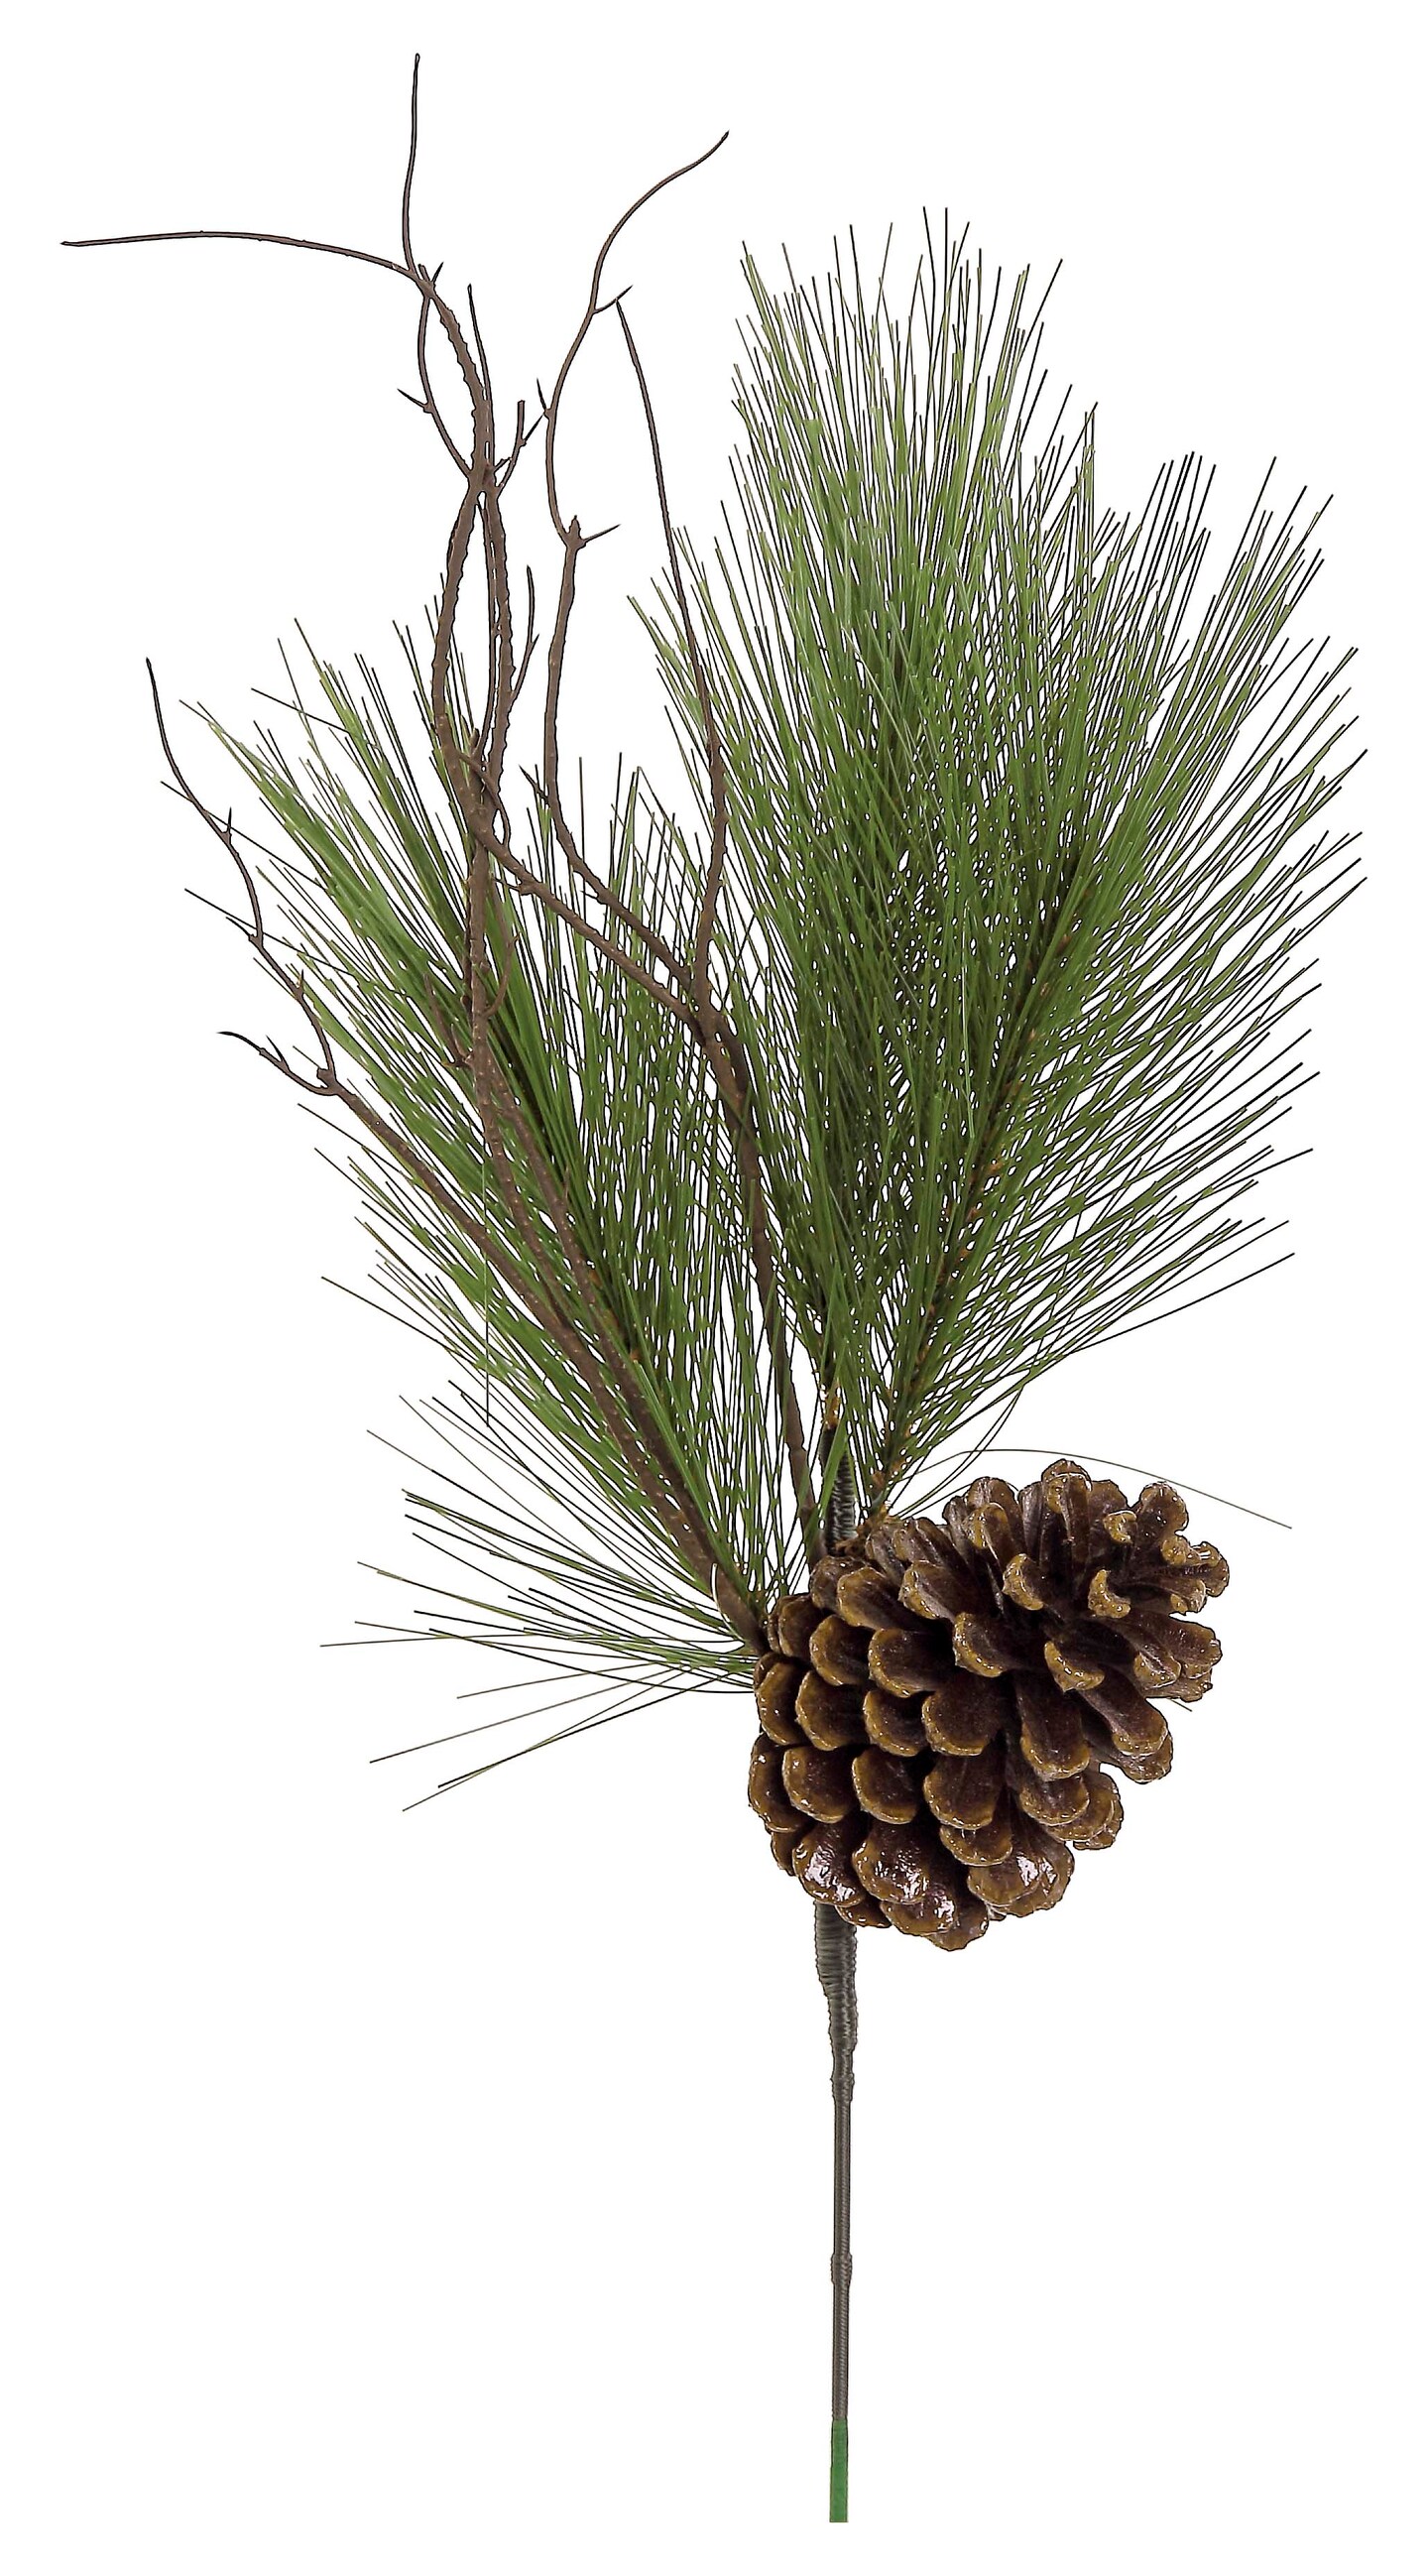 Long Needle Pine Pick with Cones Realistic Branch Pine Cones